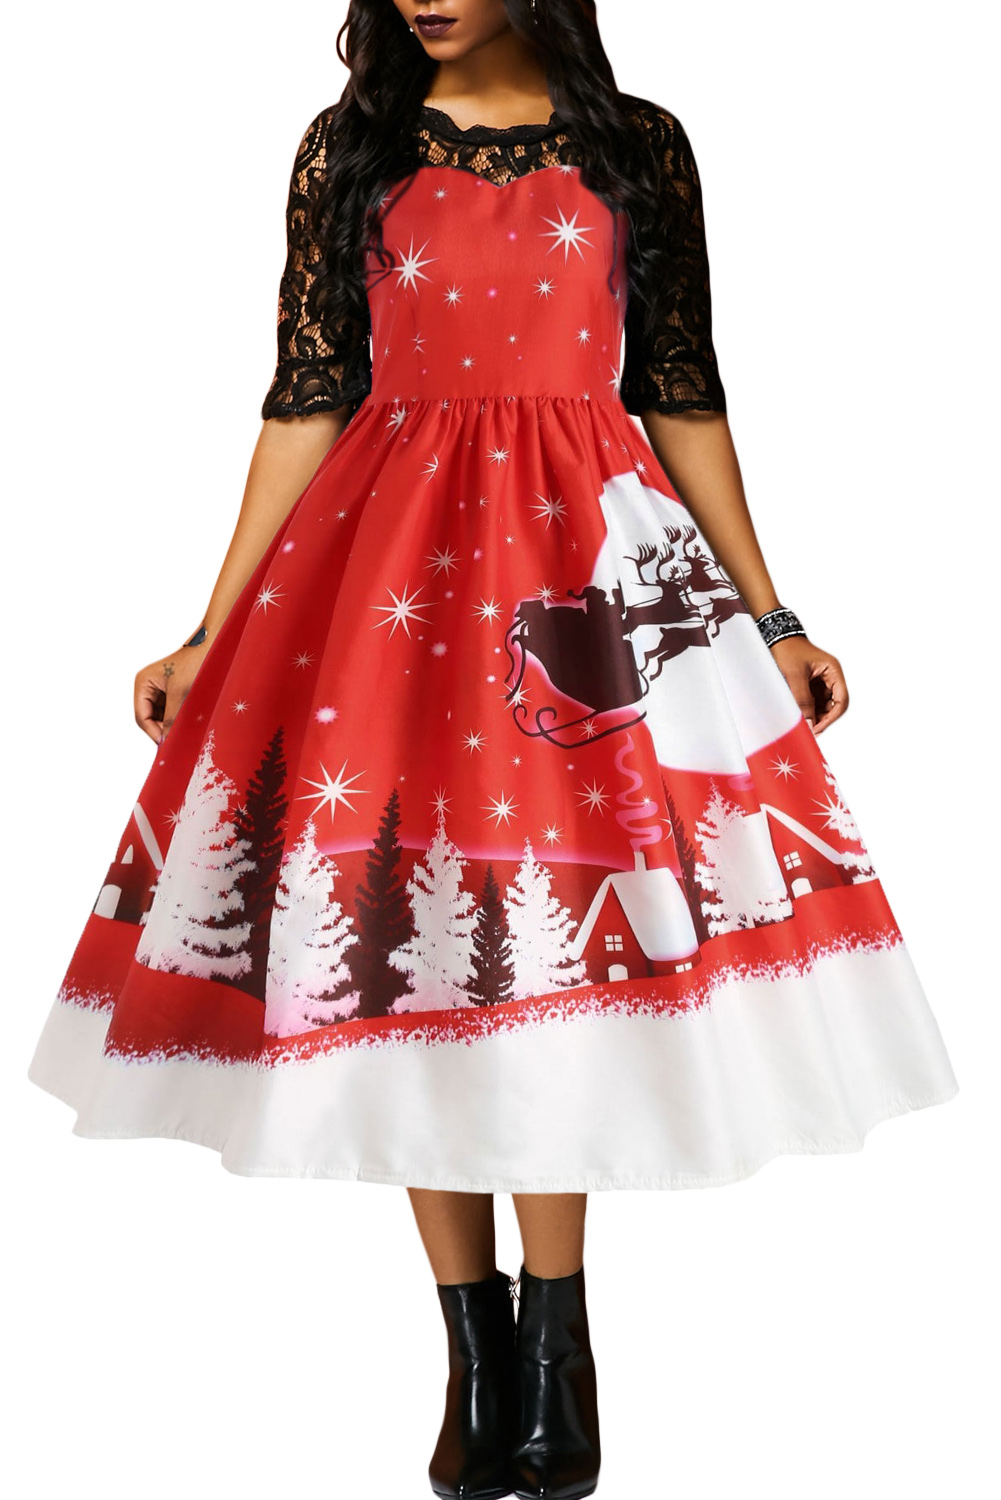 BY610920-1 JINGLE ALL THE THE WAY CHRISTMAS PRINT FLARED DRESS